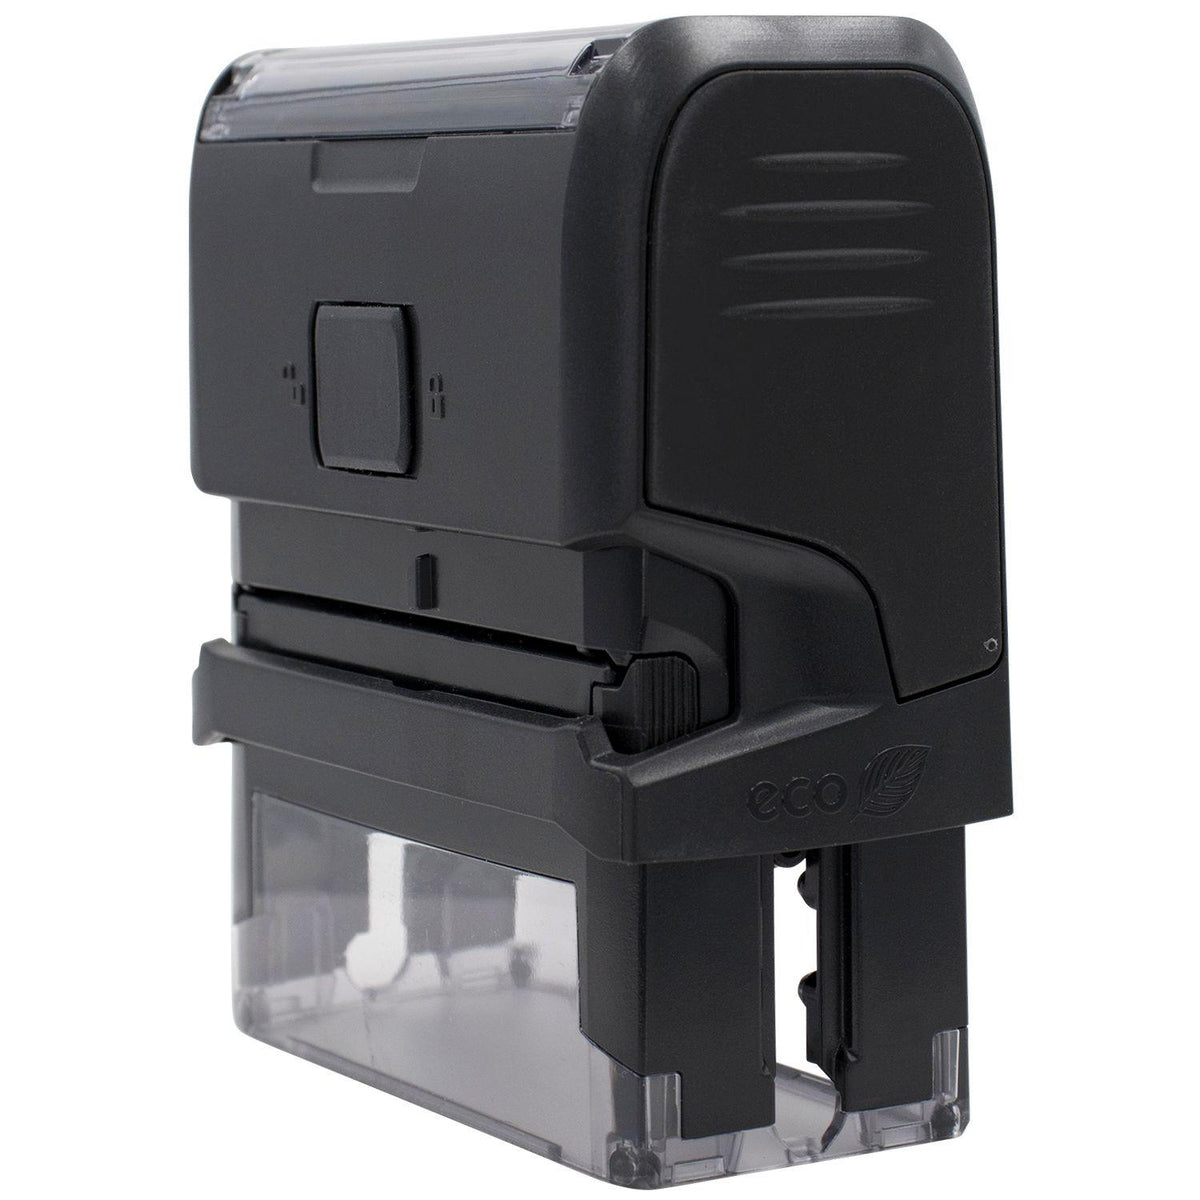 Large Self-Inking Covid-19 Tested Stamp - Engineer Seal Stamps - Brand_Trodat, Impression Size_Large, Stamp Type_Self-Inking Stamp, Type of Use_Medical Office